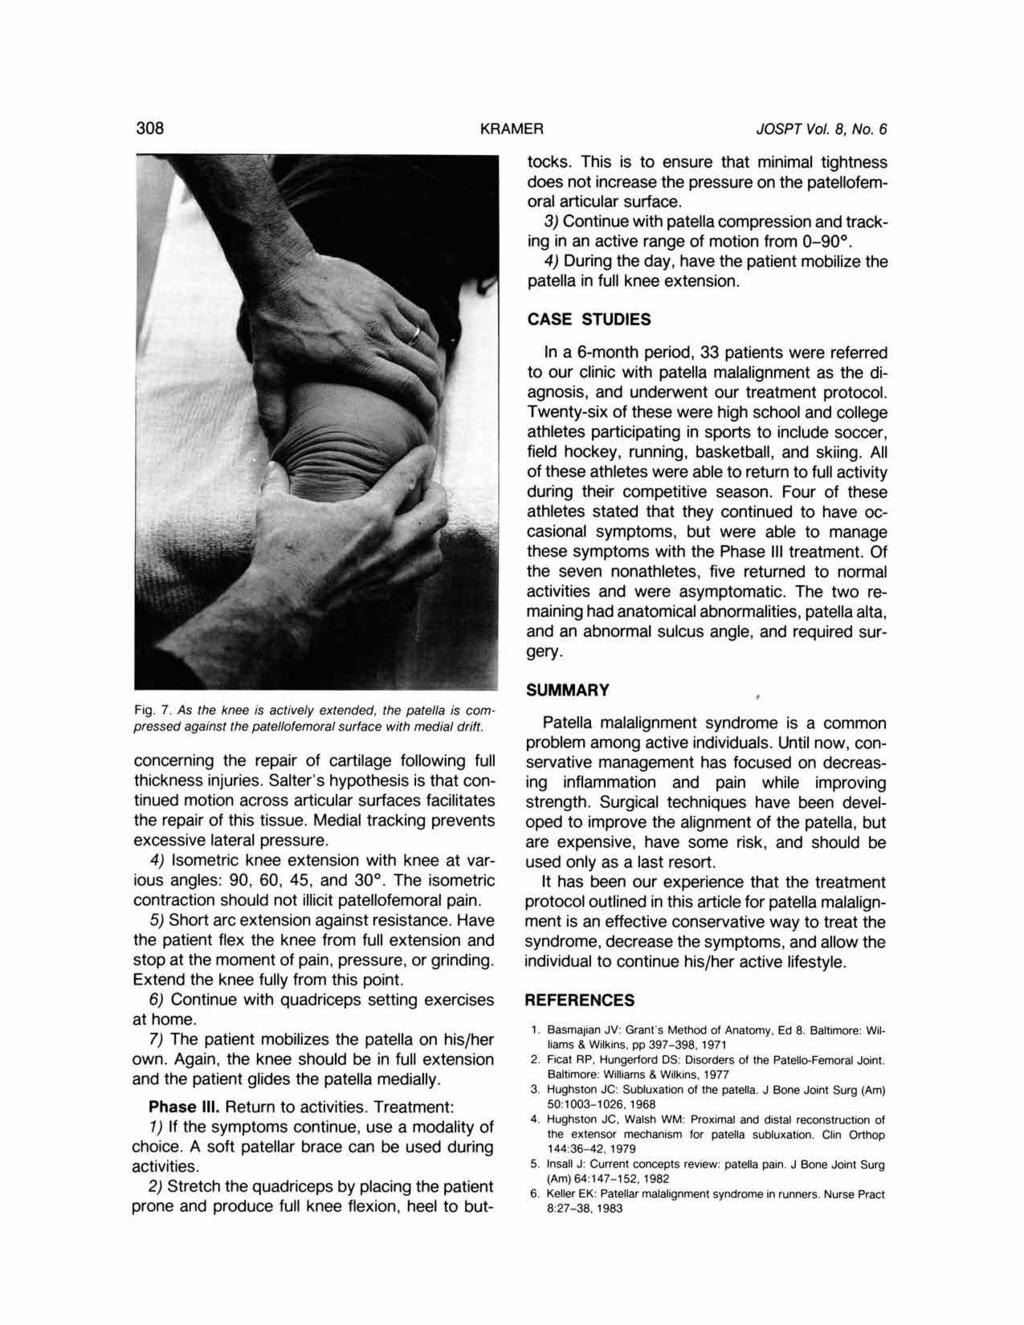 Fig. 7. As the knee is actively extended, the patella is compressed against the patellofemoral surface with medial drift. concerning the repair of cartilage following full thickness injuries.